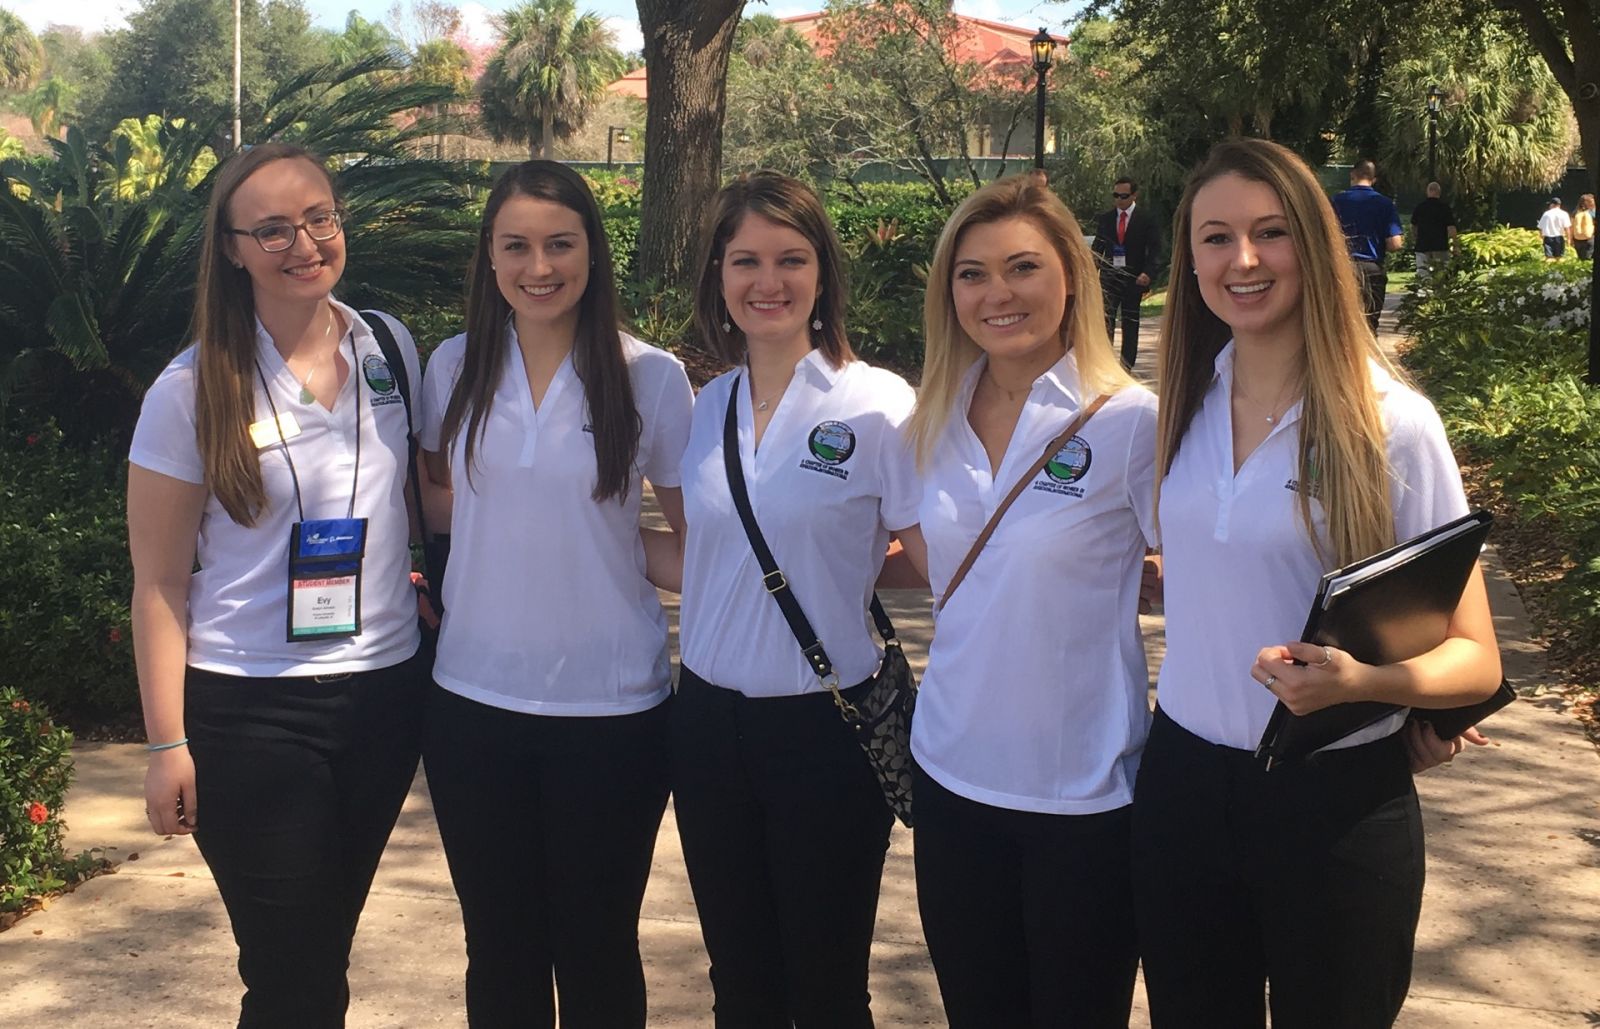 Aviation students at the Women in Aviation International Conference in Orlando, Florida